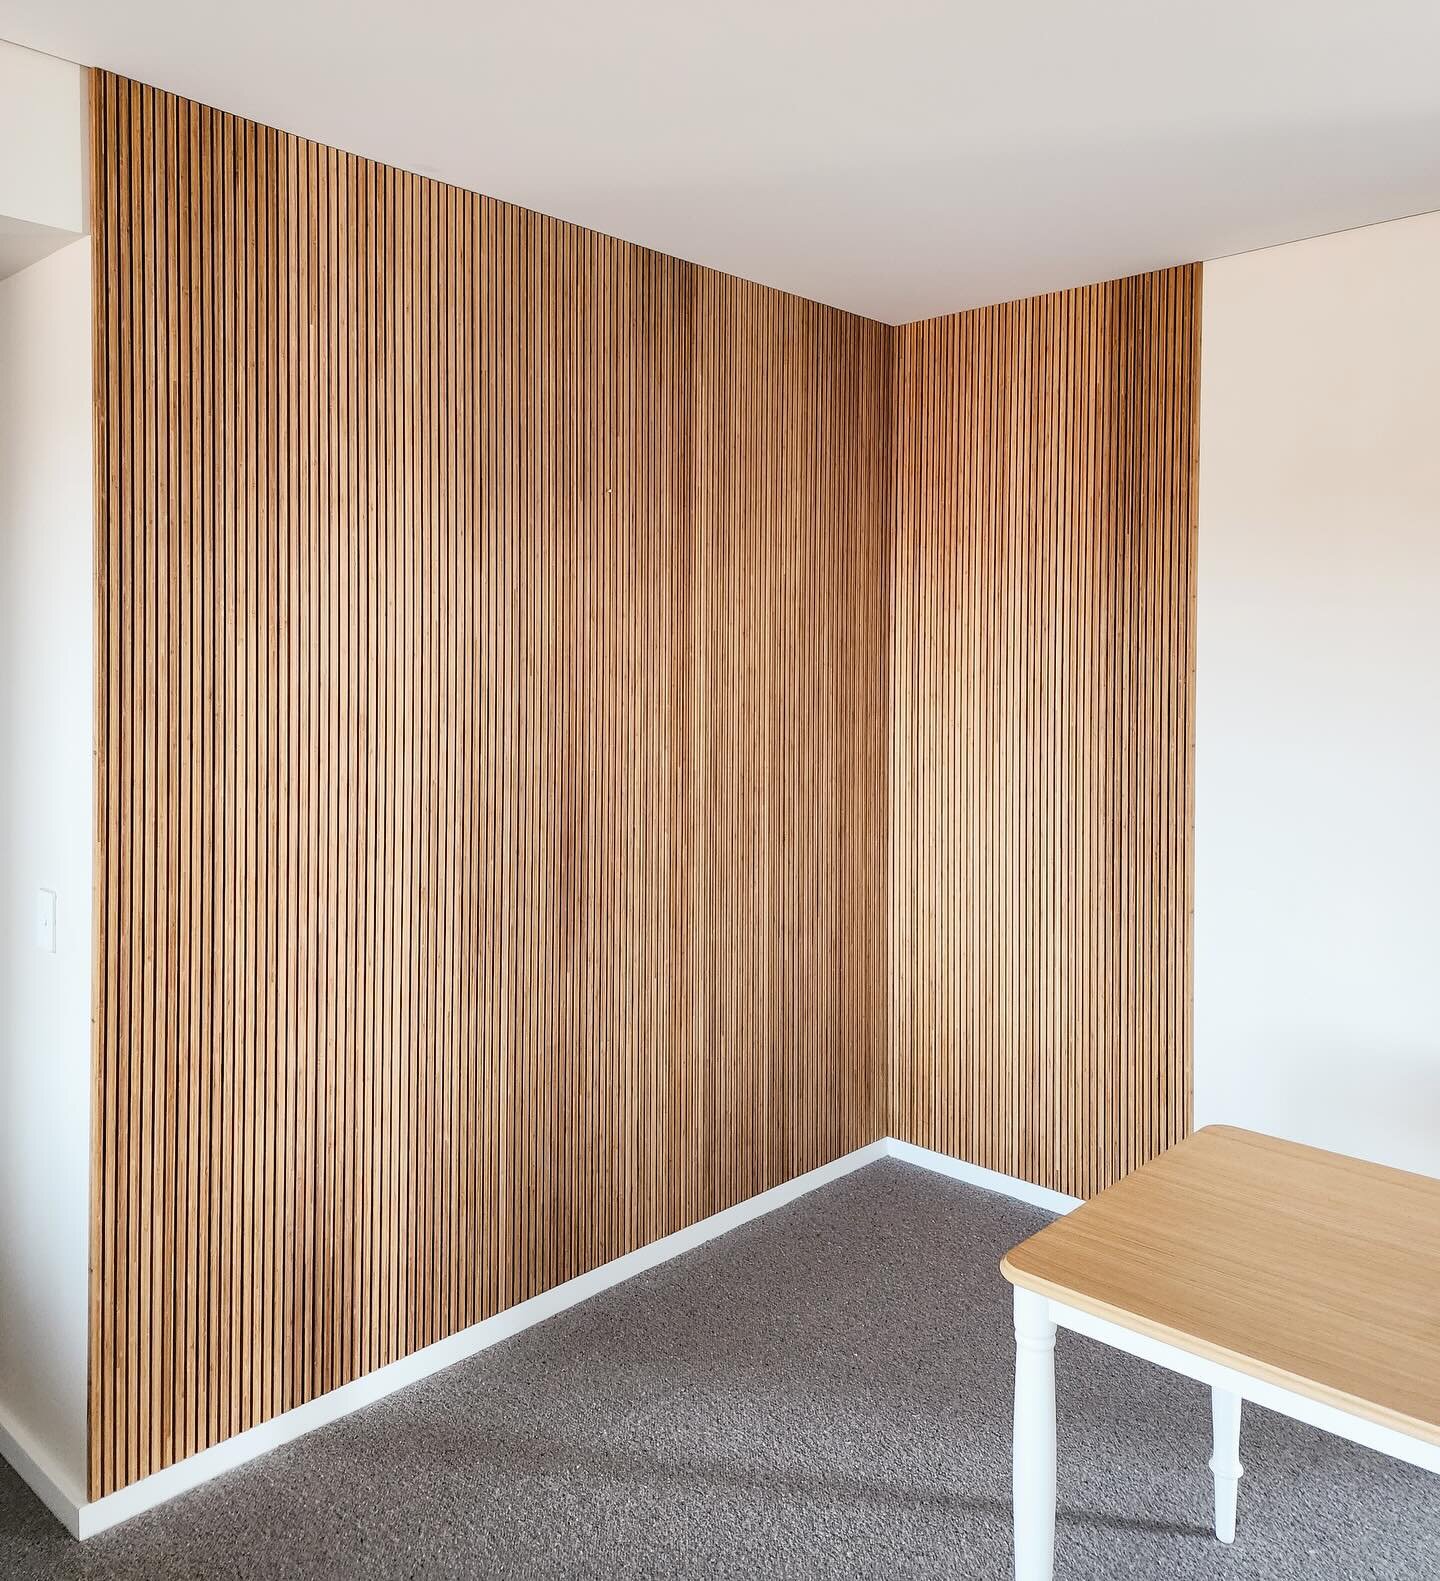 Our beautiful bamboo ready to transform this dining room. 

Another great example that by not covering all walls, you can create depth and defined sections within your home!

Profile: Linear6
Colour: Natural
Installer: @kayudesignco